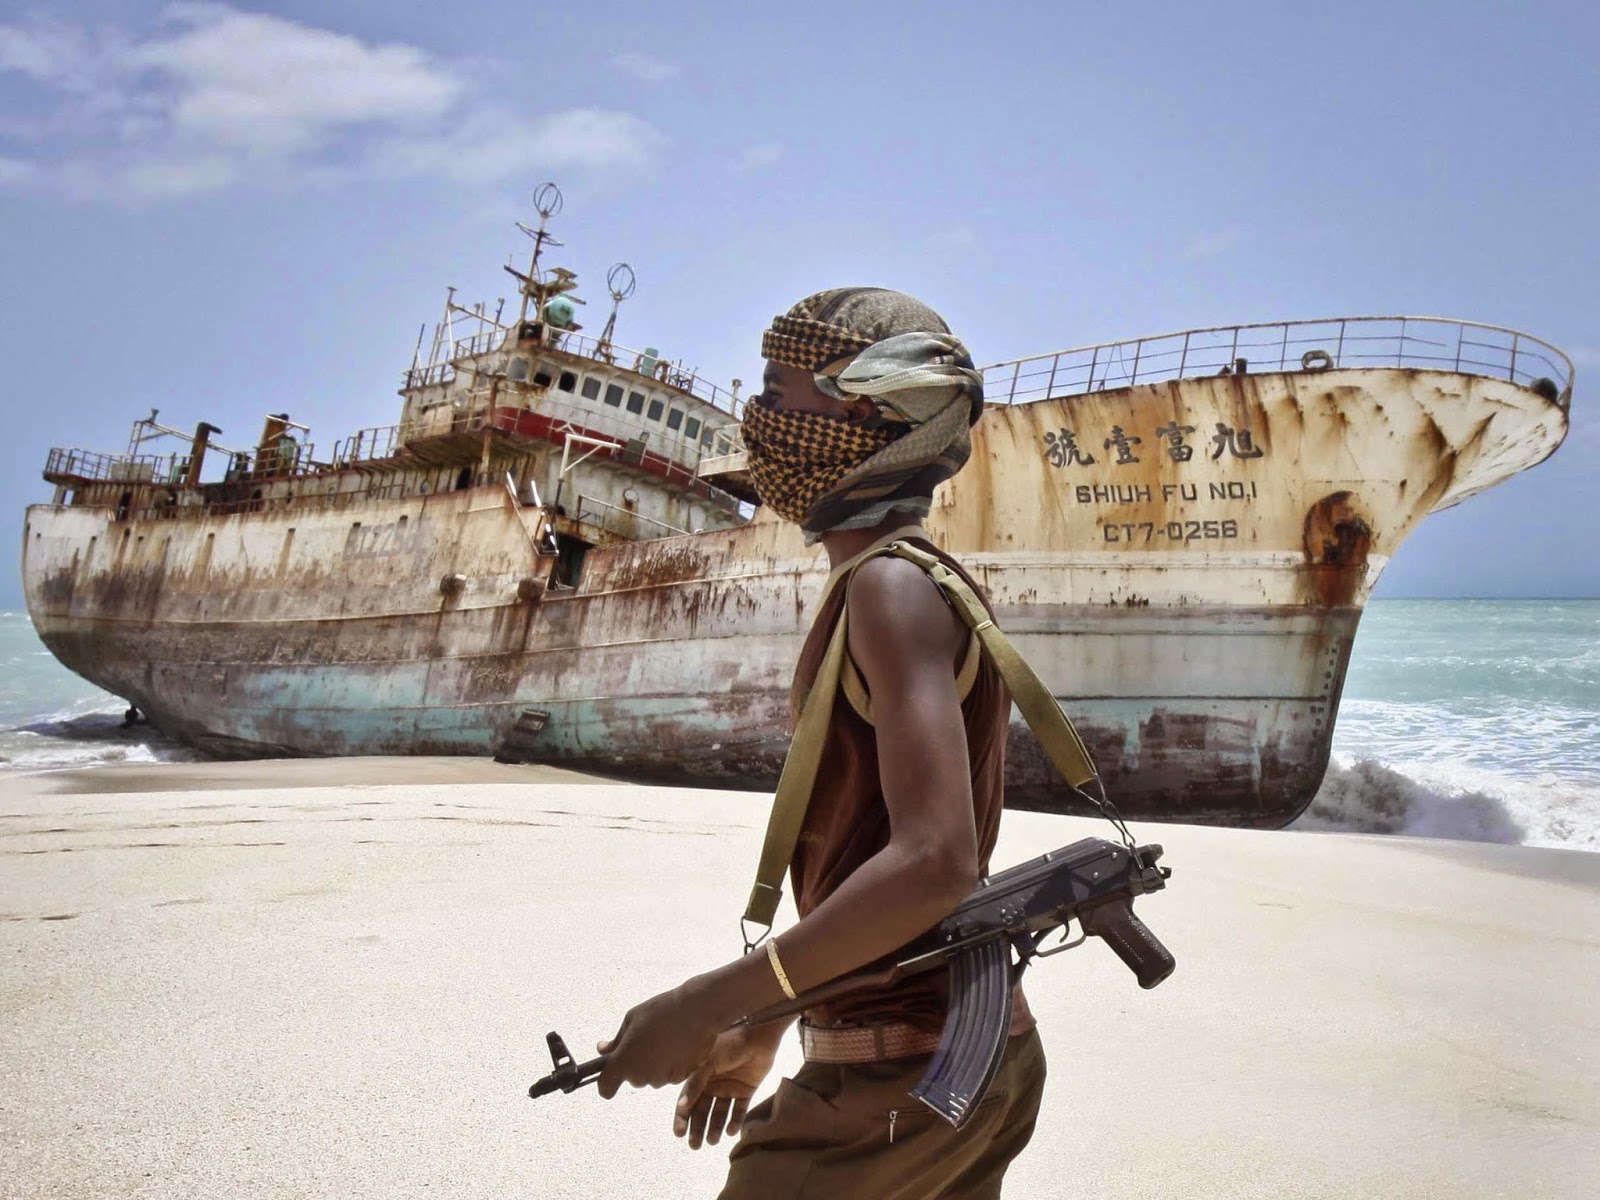 native dawn: How the Somali Pirates Affect Global Trade